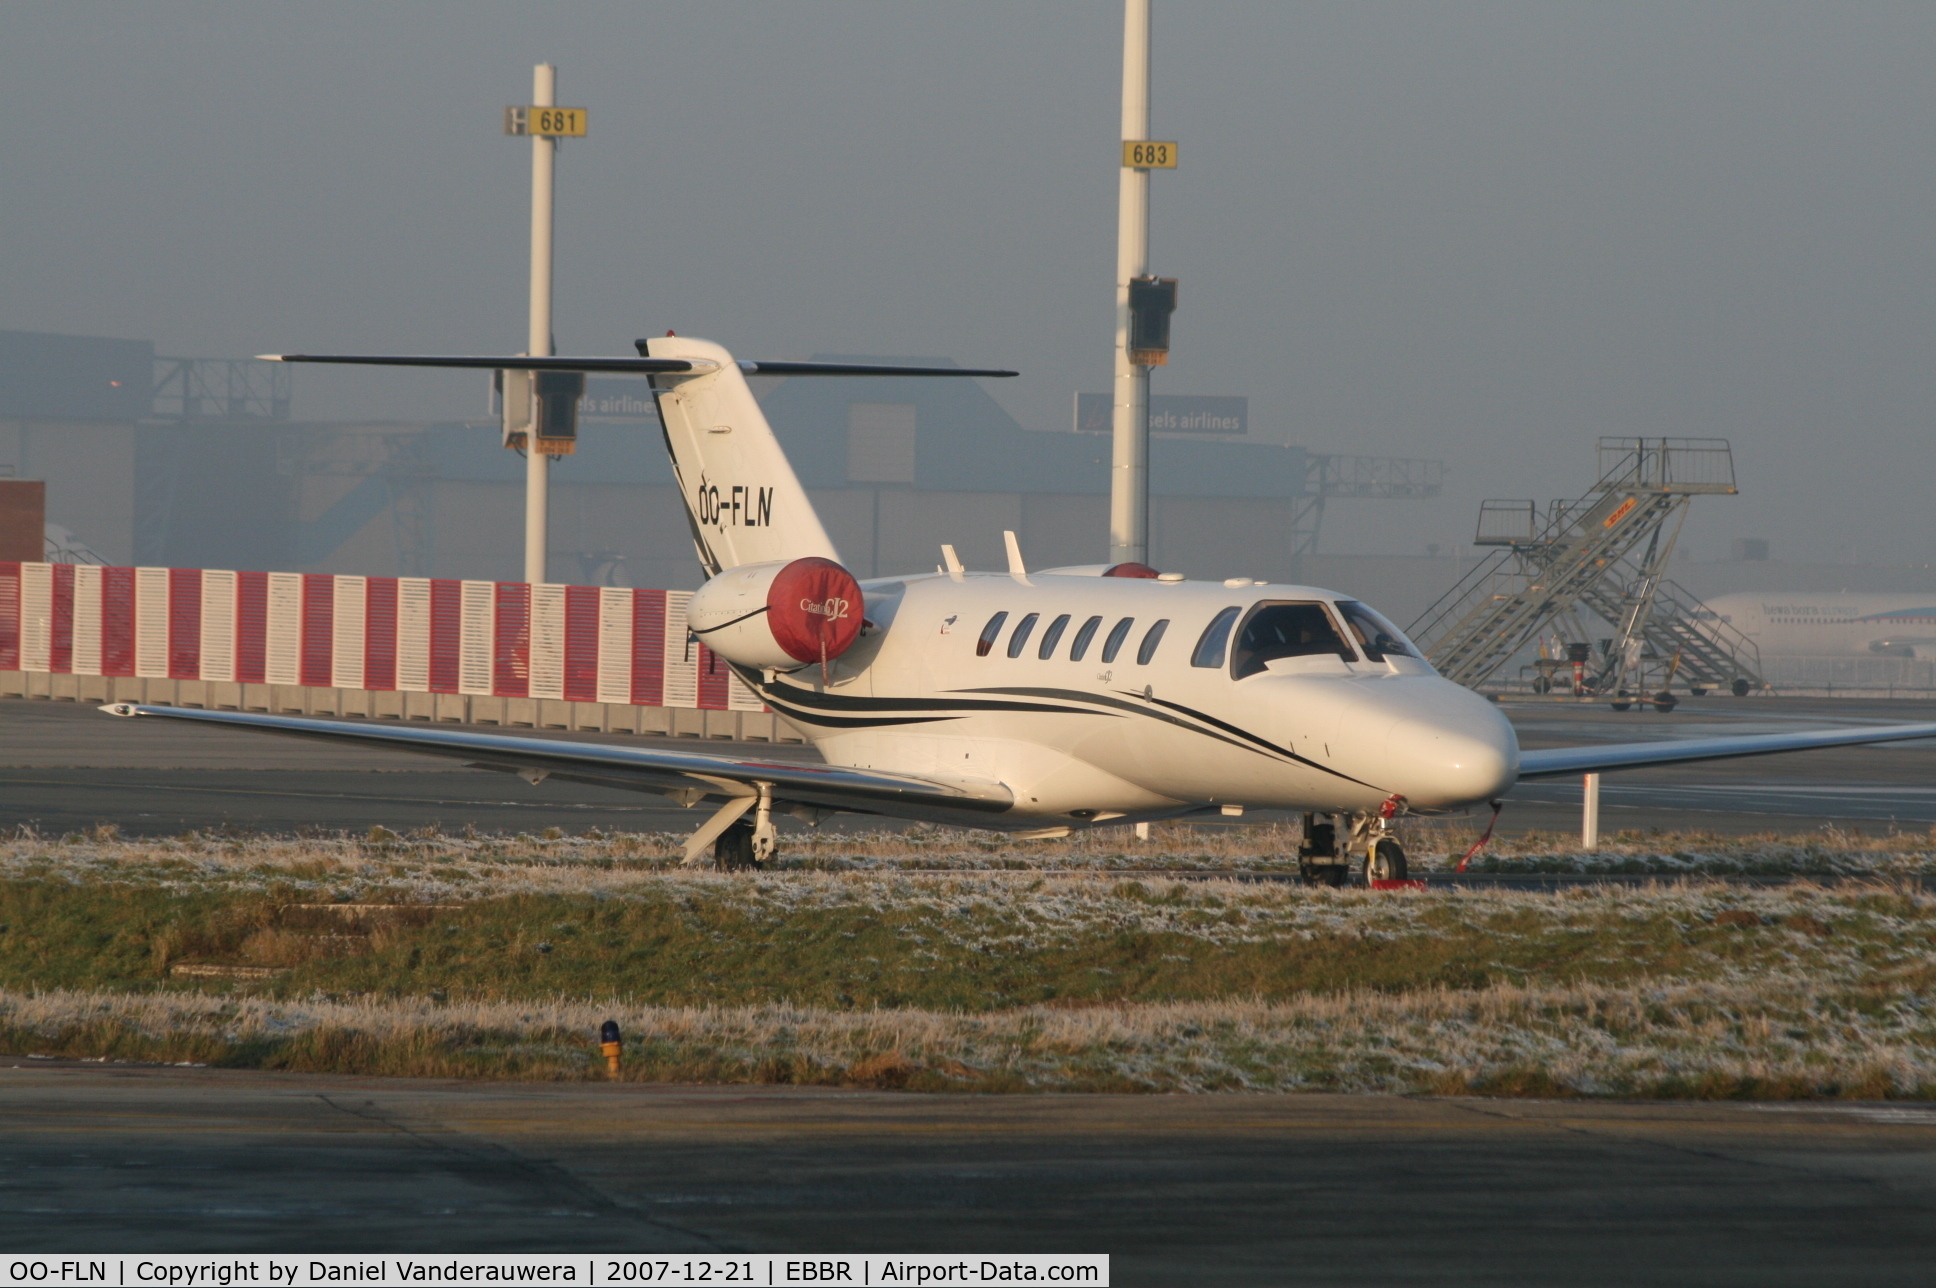 OO-FLN, 2003 Cessna 525A CitationJet CJ2 C/N 525A-0179, parked on General Aviation apron for a long week-end